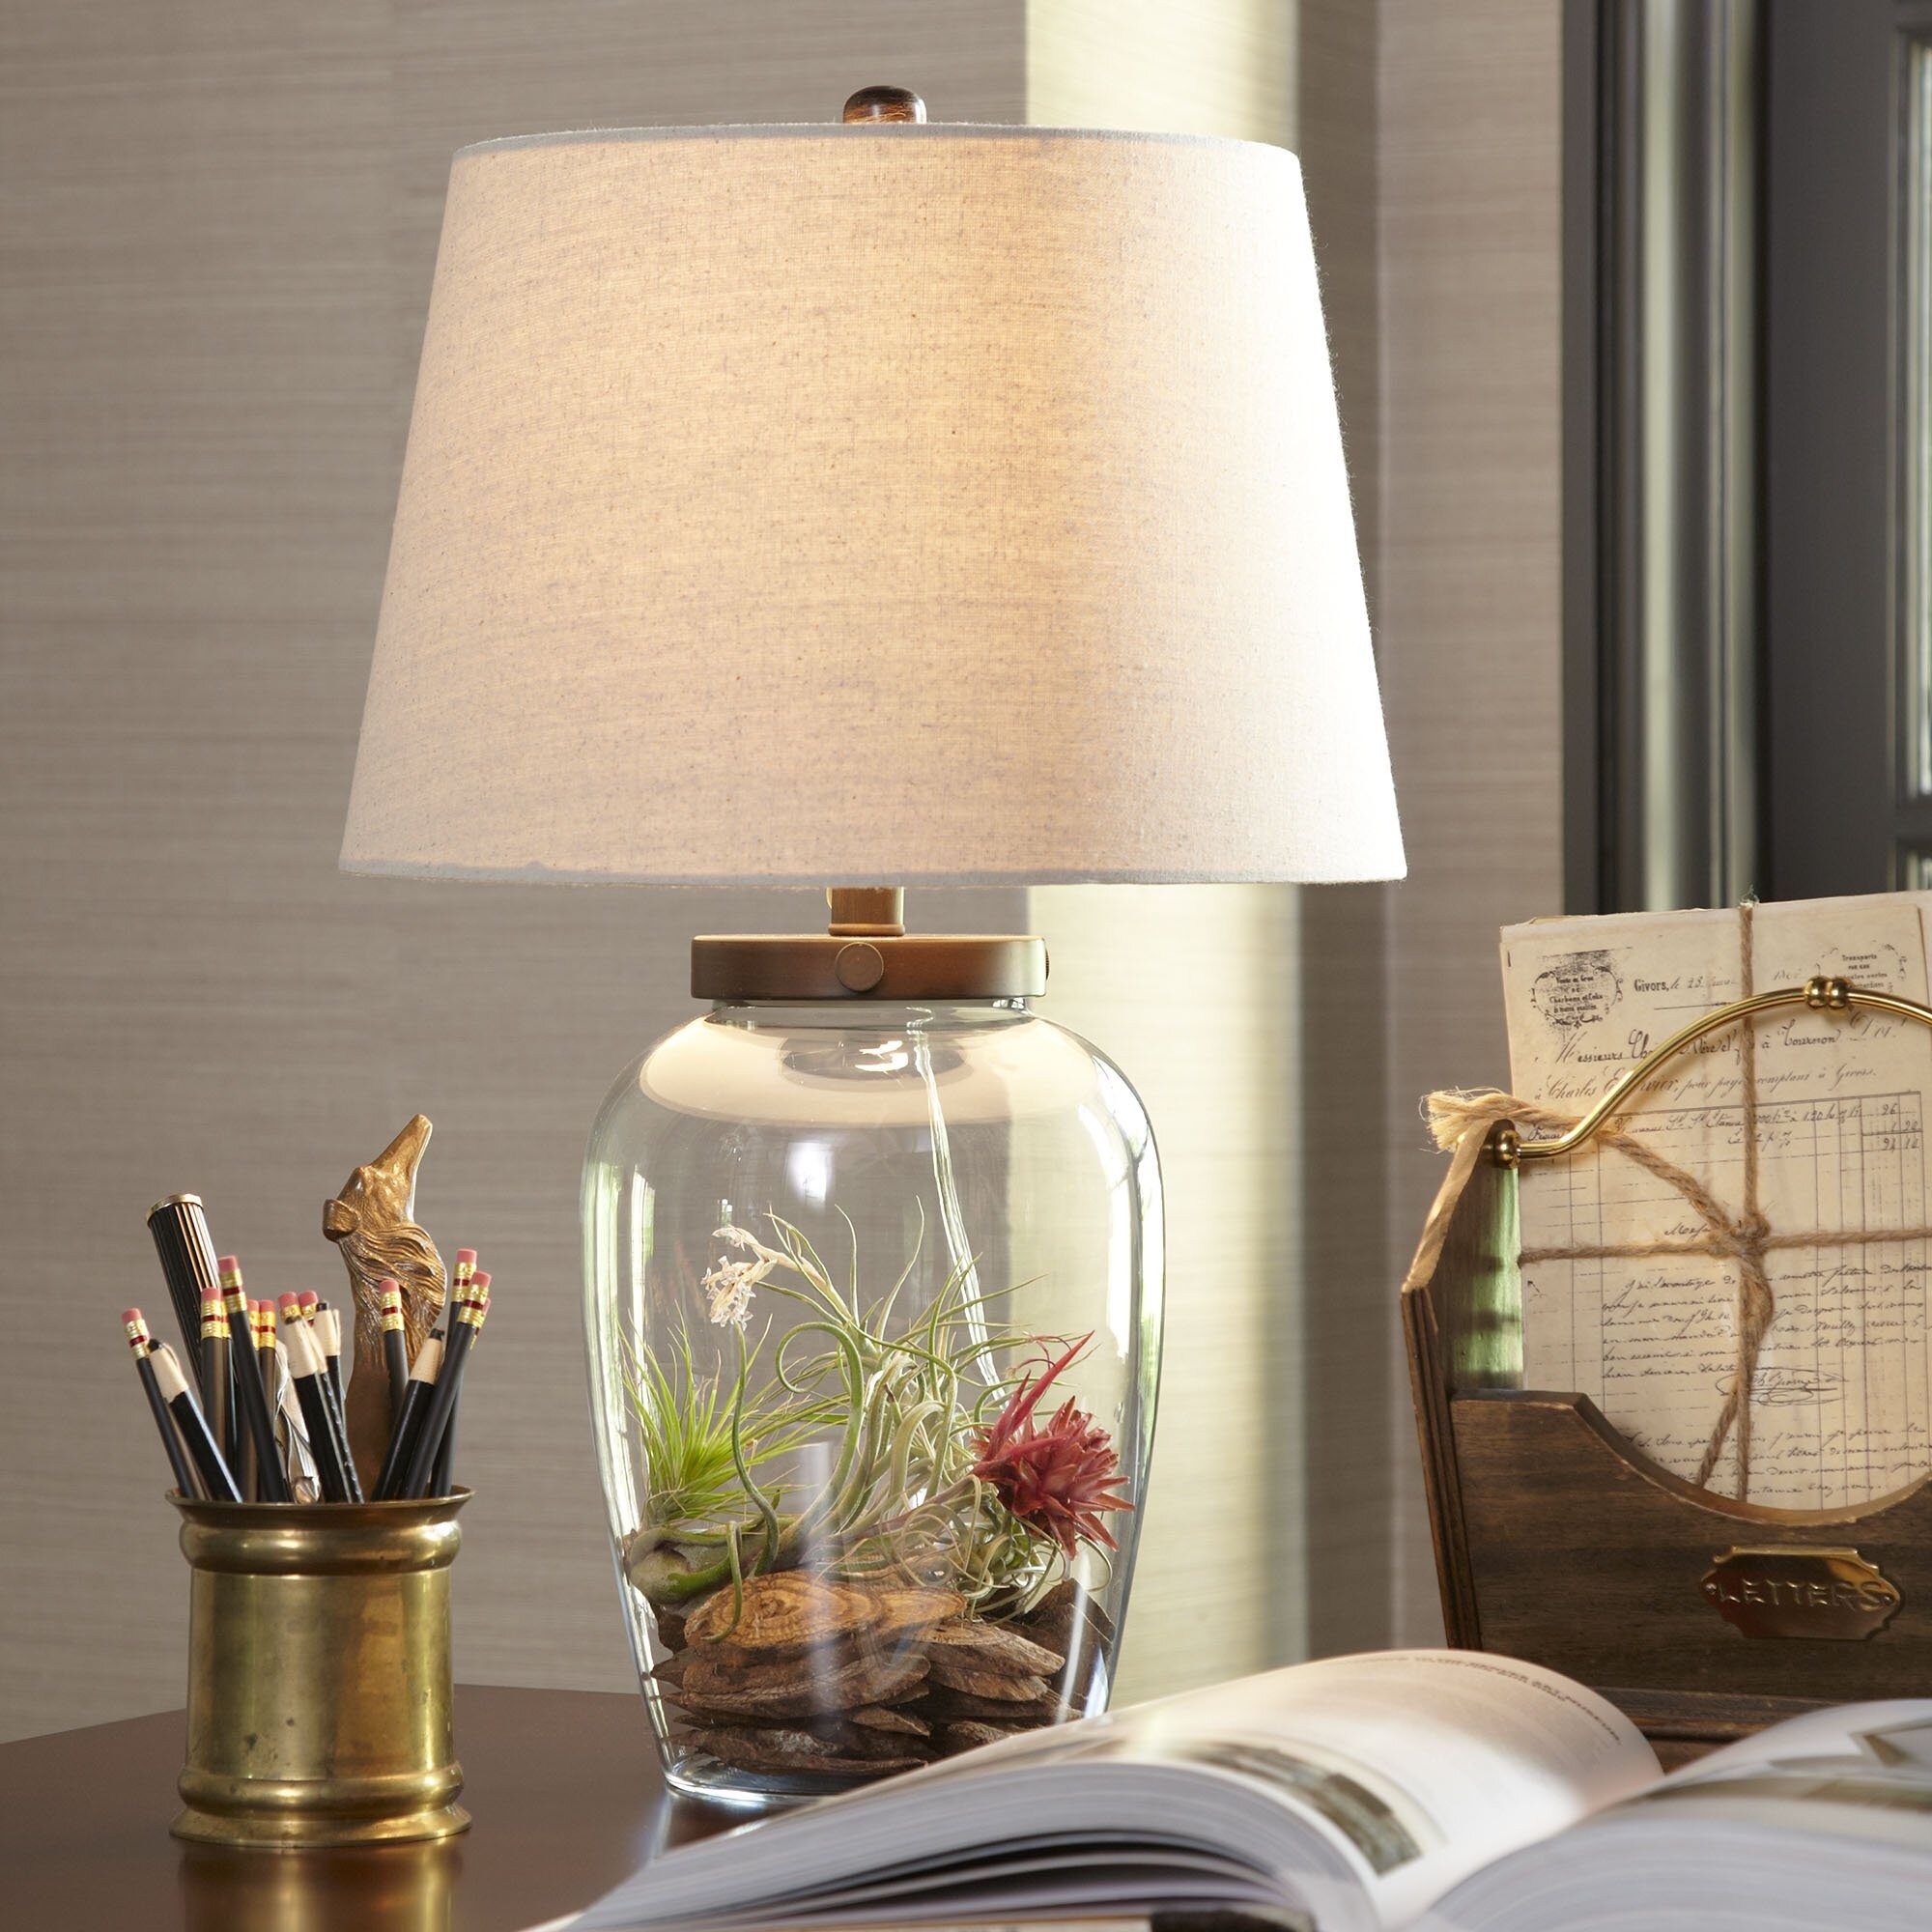 Your Favorite Hockey Team Plate Rolled in on The lamp Base MC Rico Table Lamp with Shade 